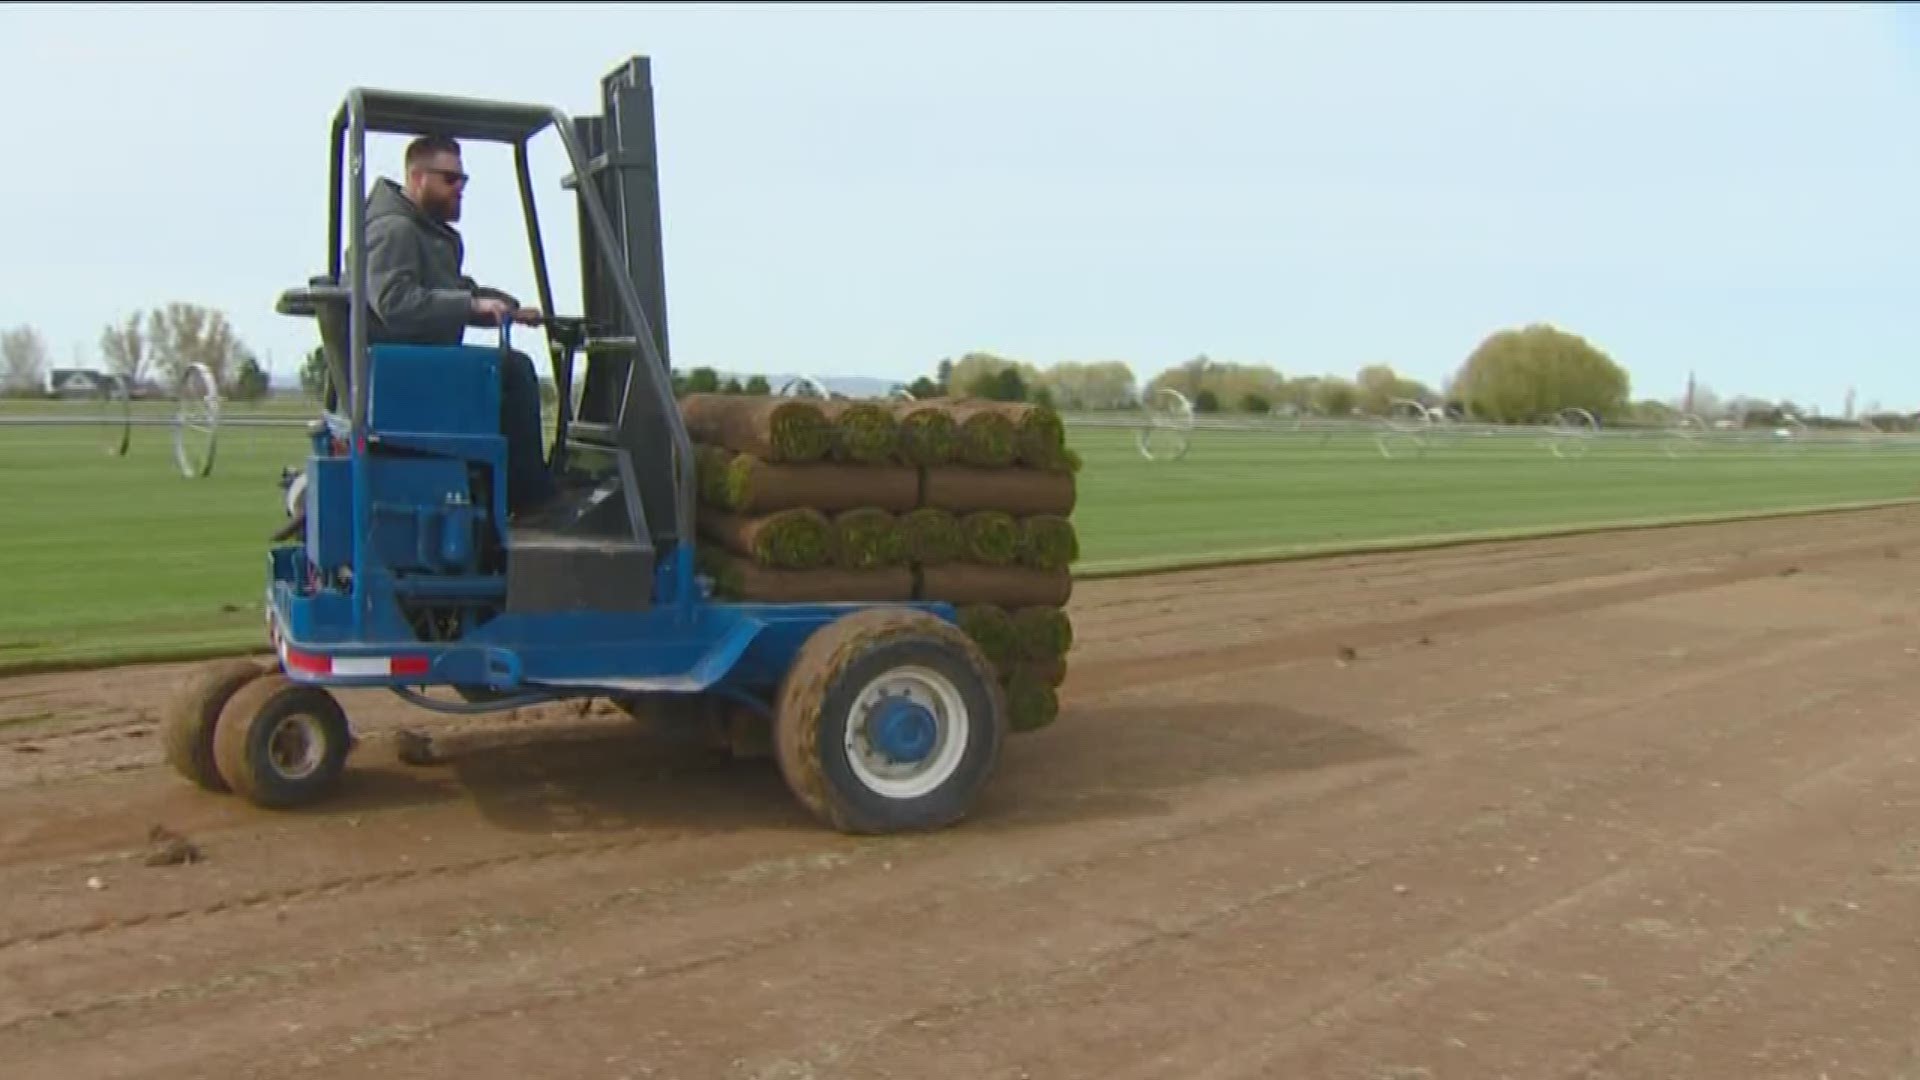 Garden master Jim Duthie heads to a local sod farm to see how they grow grass.